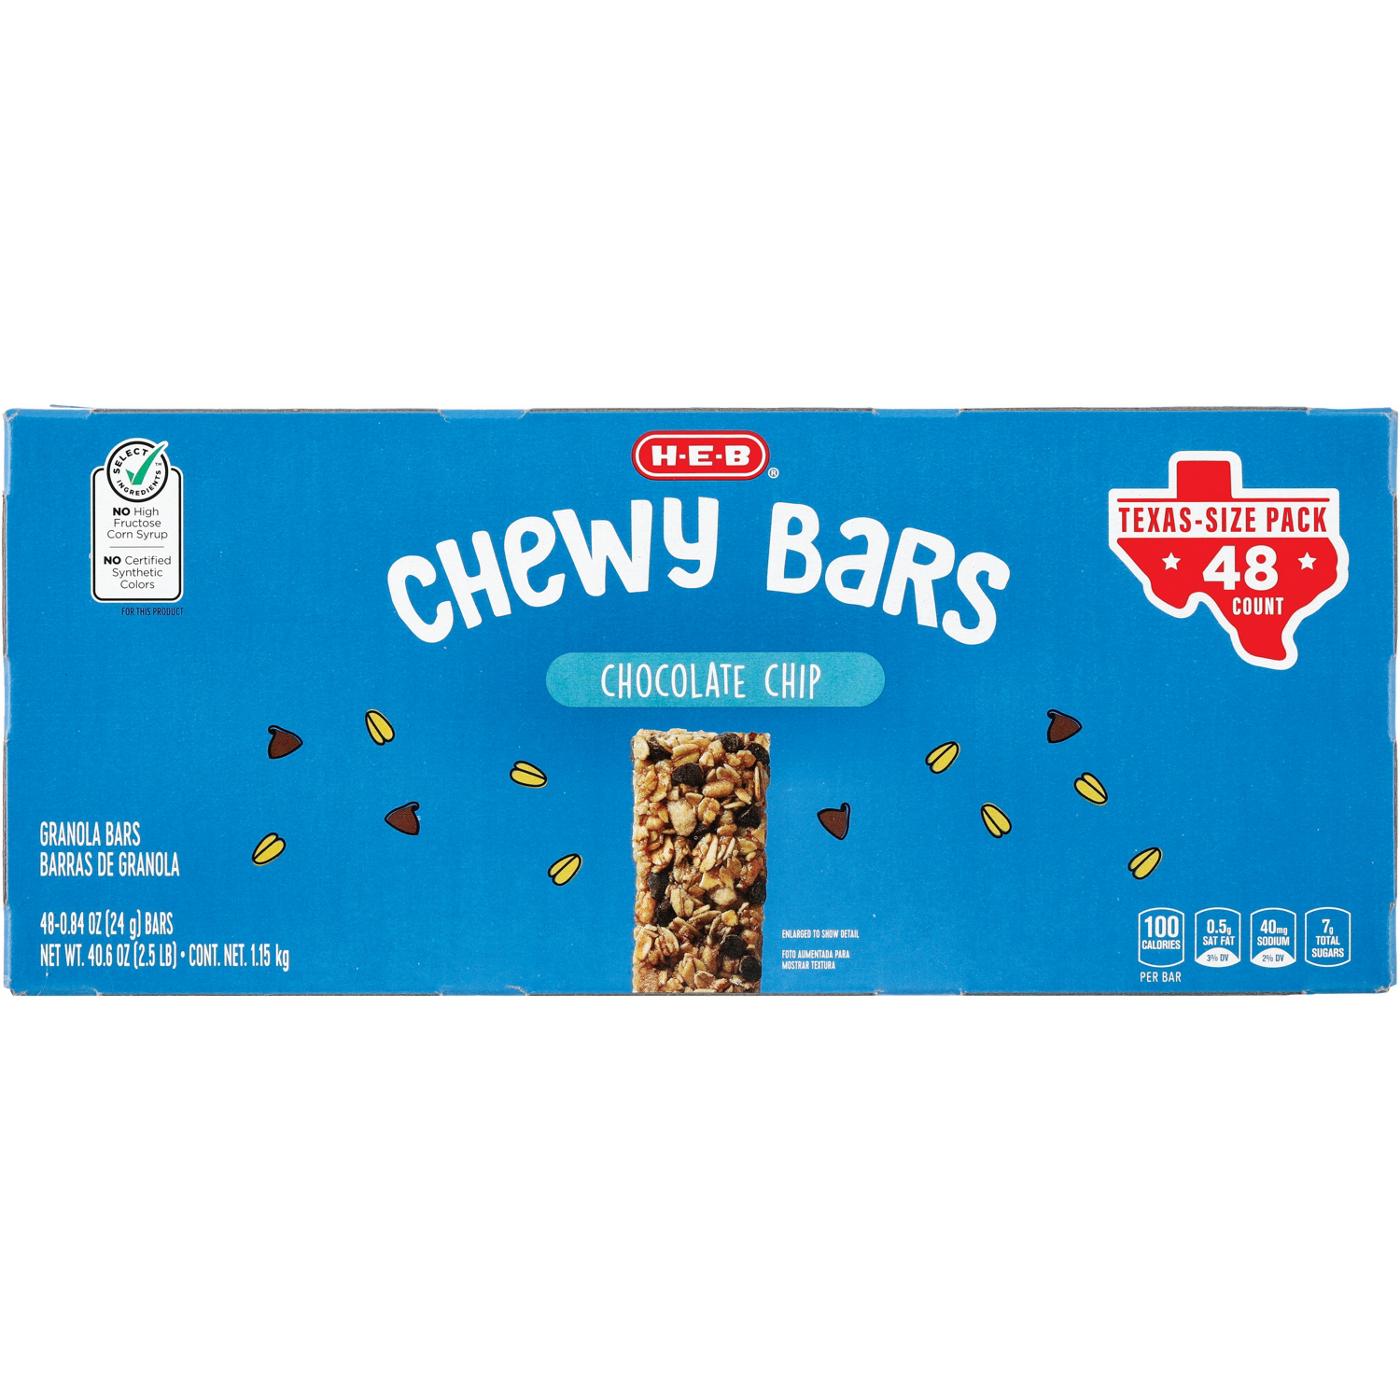 H-E-B Chocolate Chip Chewy Bars - Texas-Size Pack; image 1 of 2